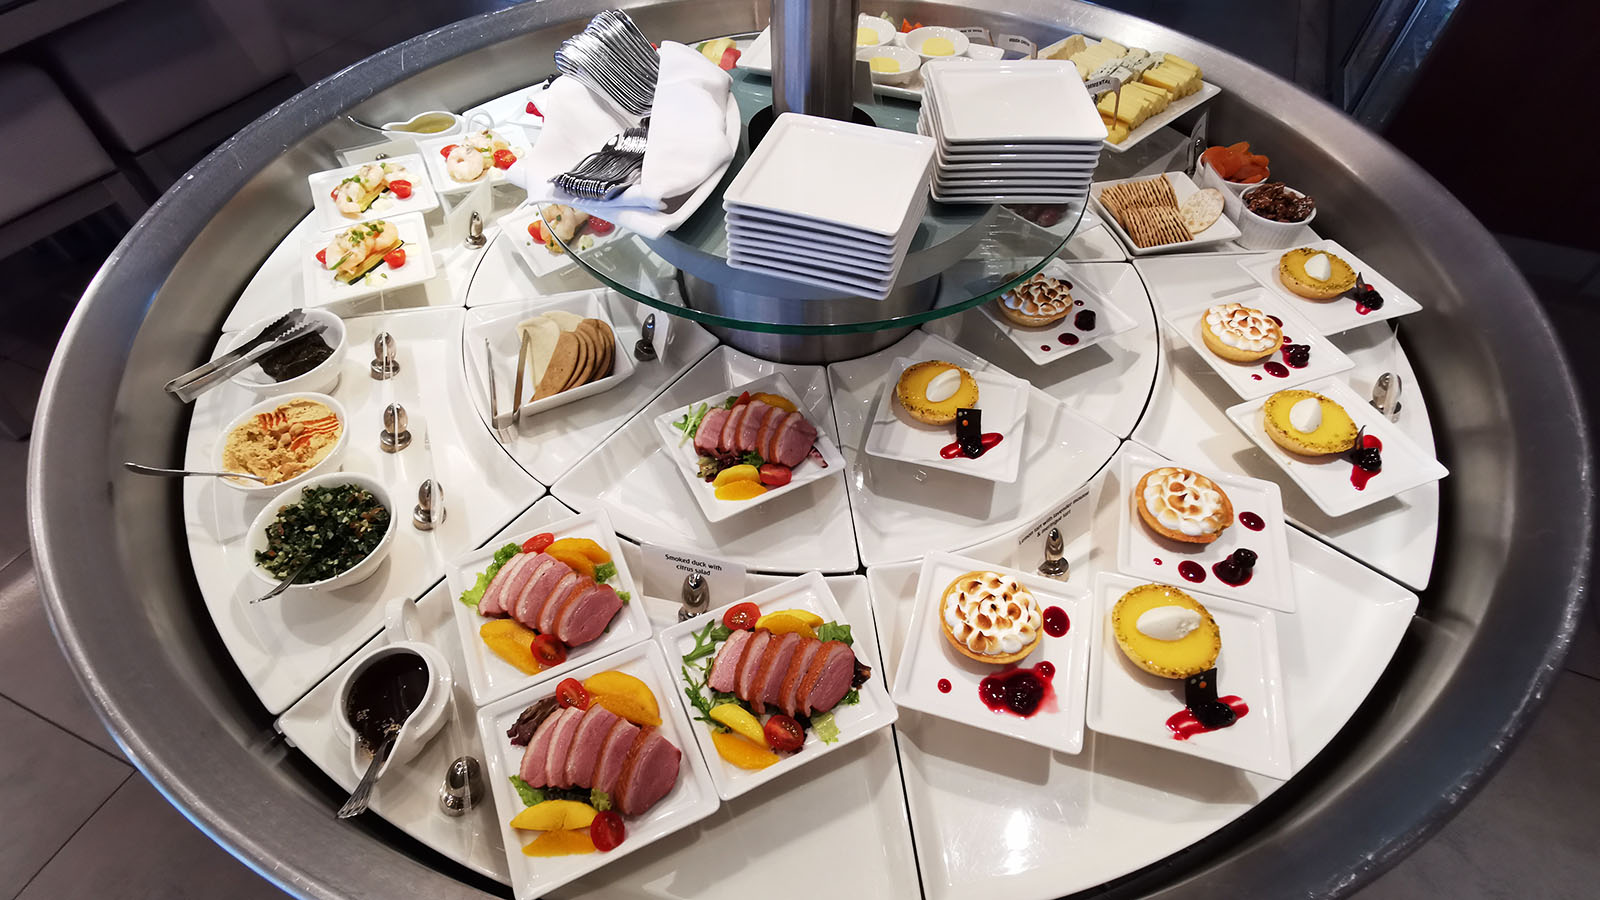 Meals and desserts at the Tan seating at the Emirates Lounge, Singapore